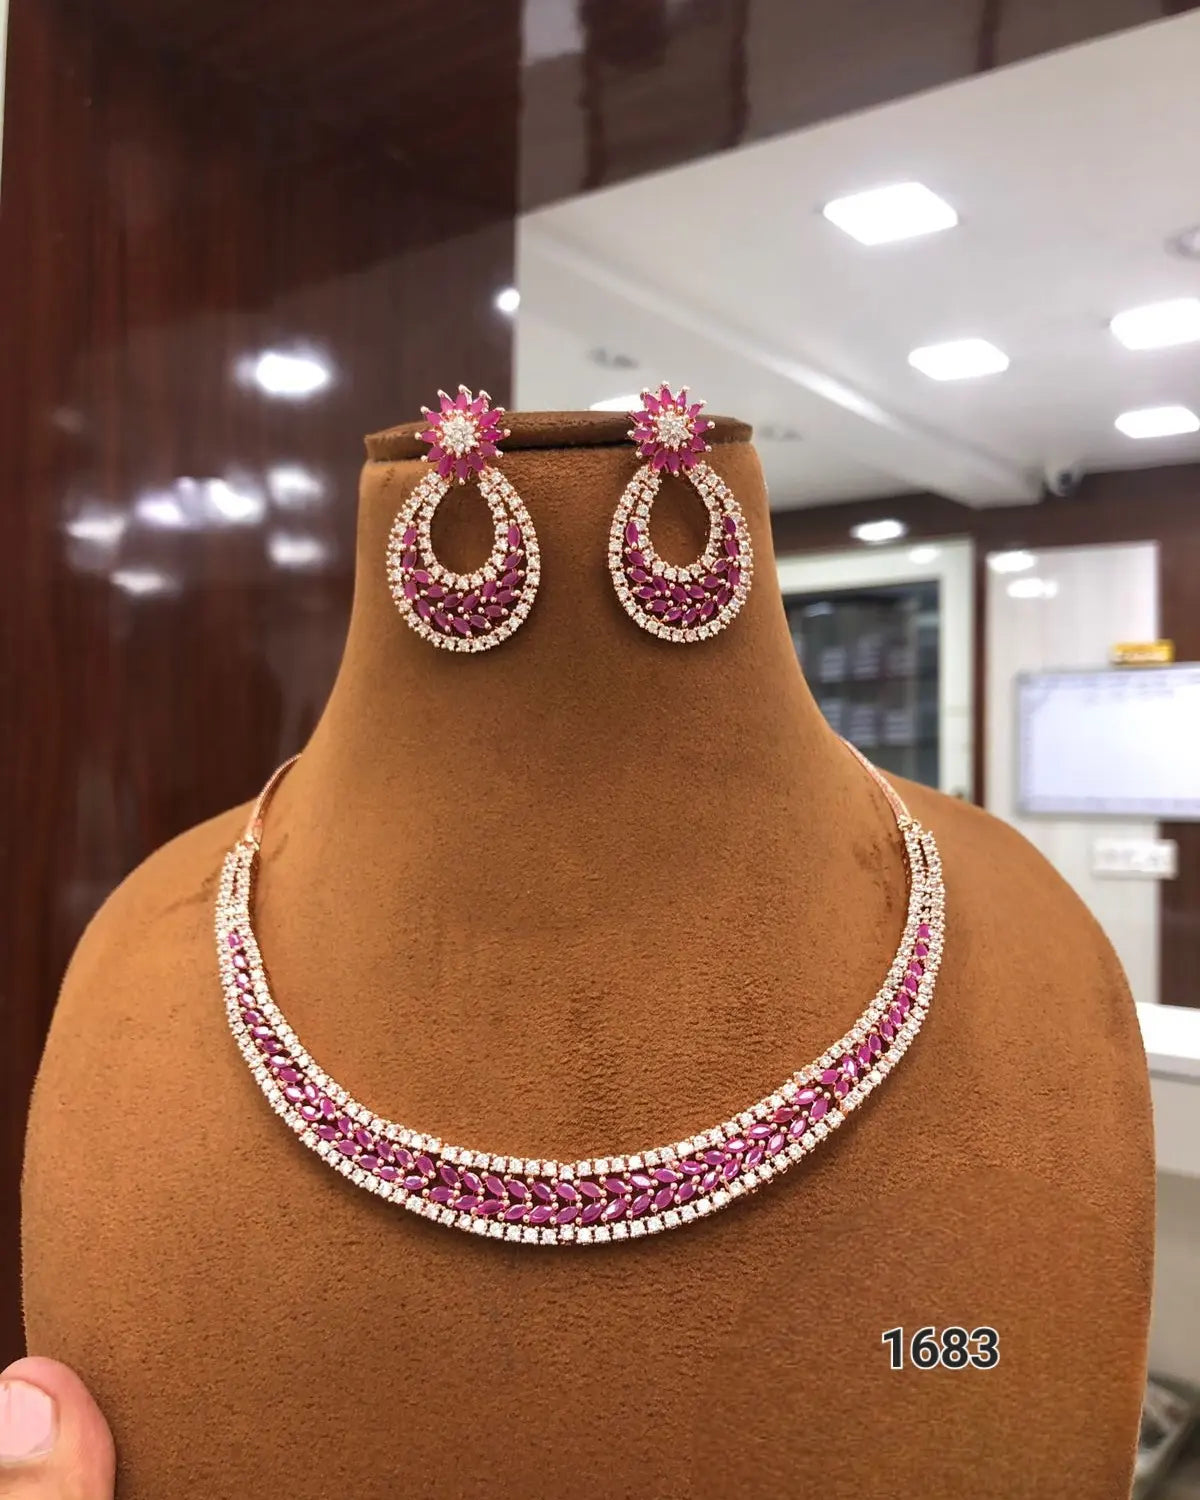 Shine Bright with our American Diamond Necklace and Earrings Set